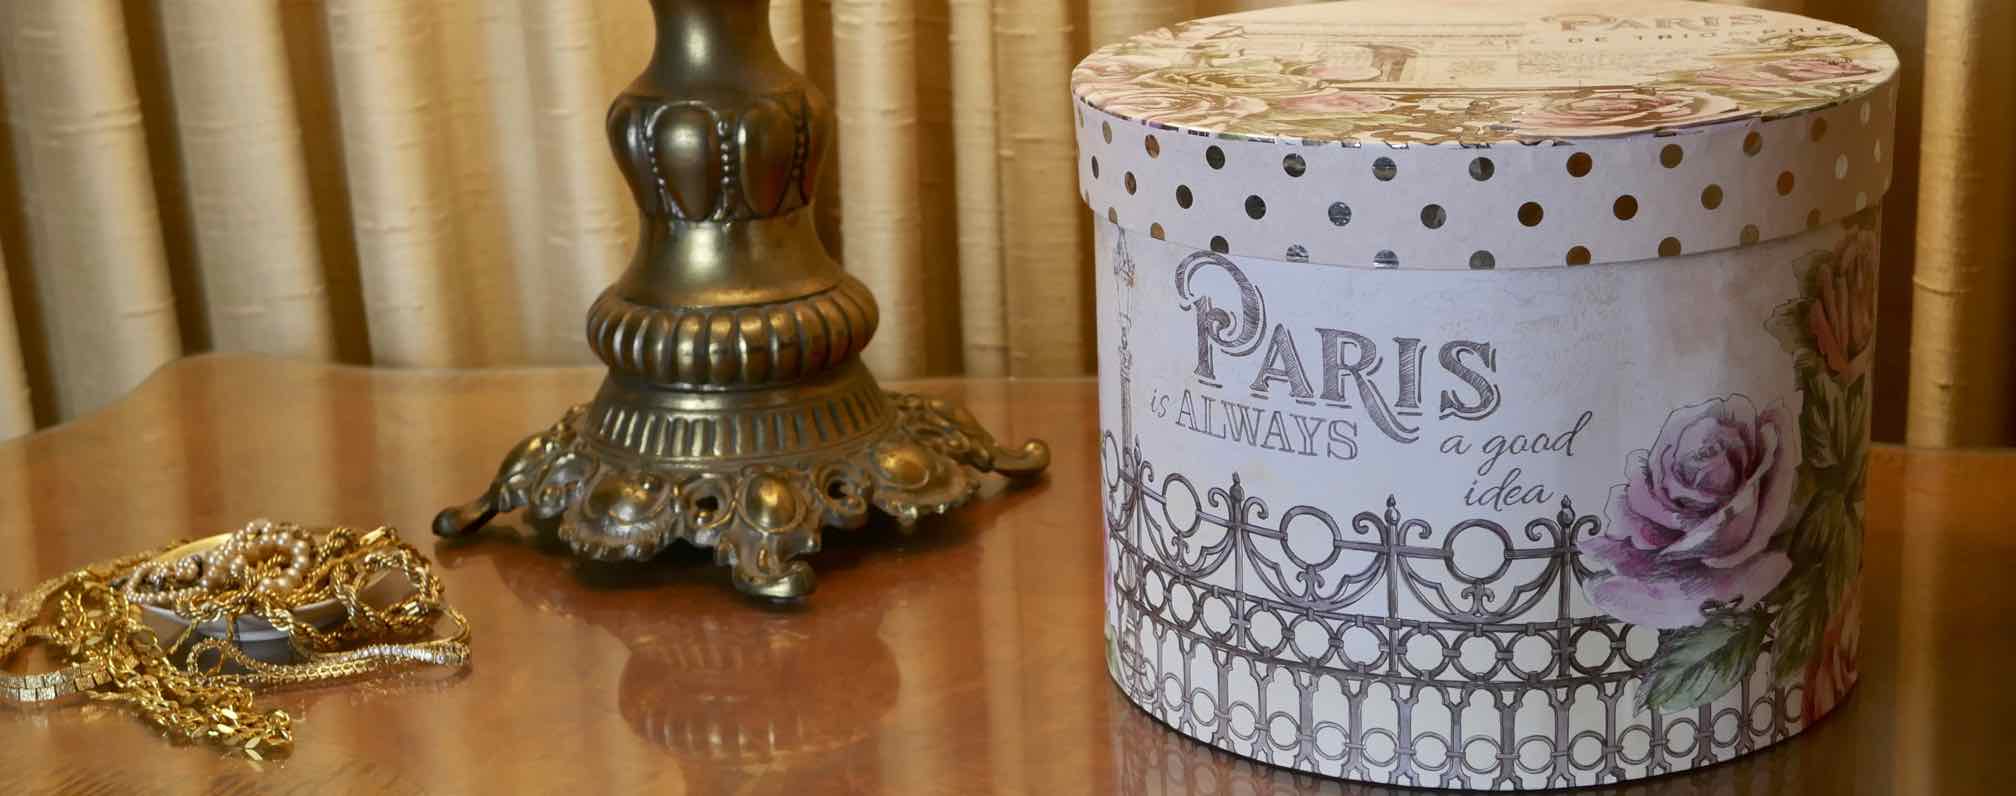 hat box with roses and inspription: Paris is always a good idea on table with lamp and assorted jewelry